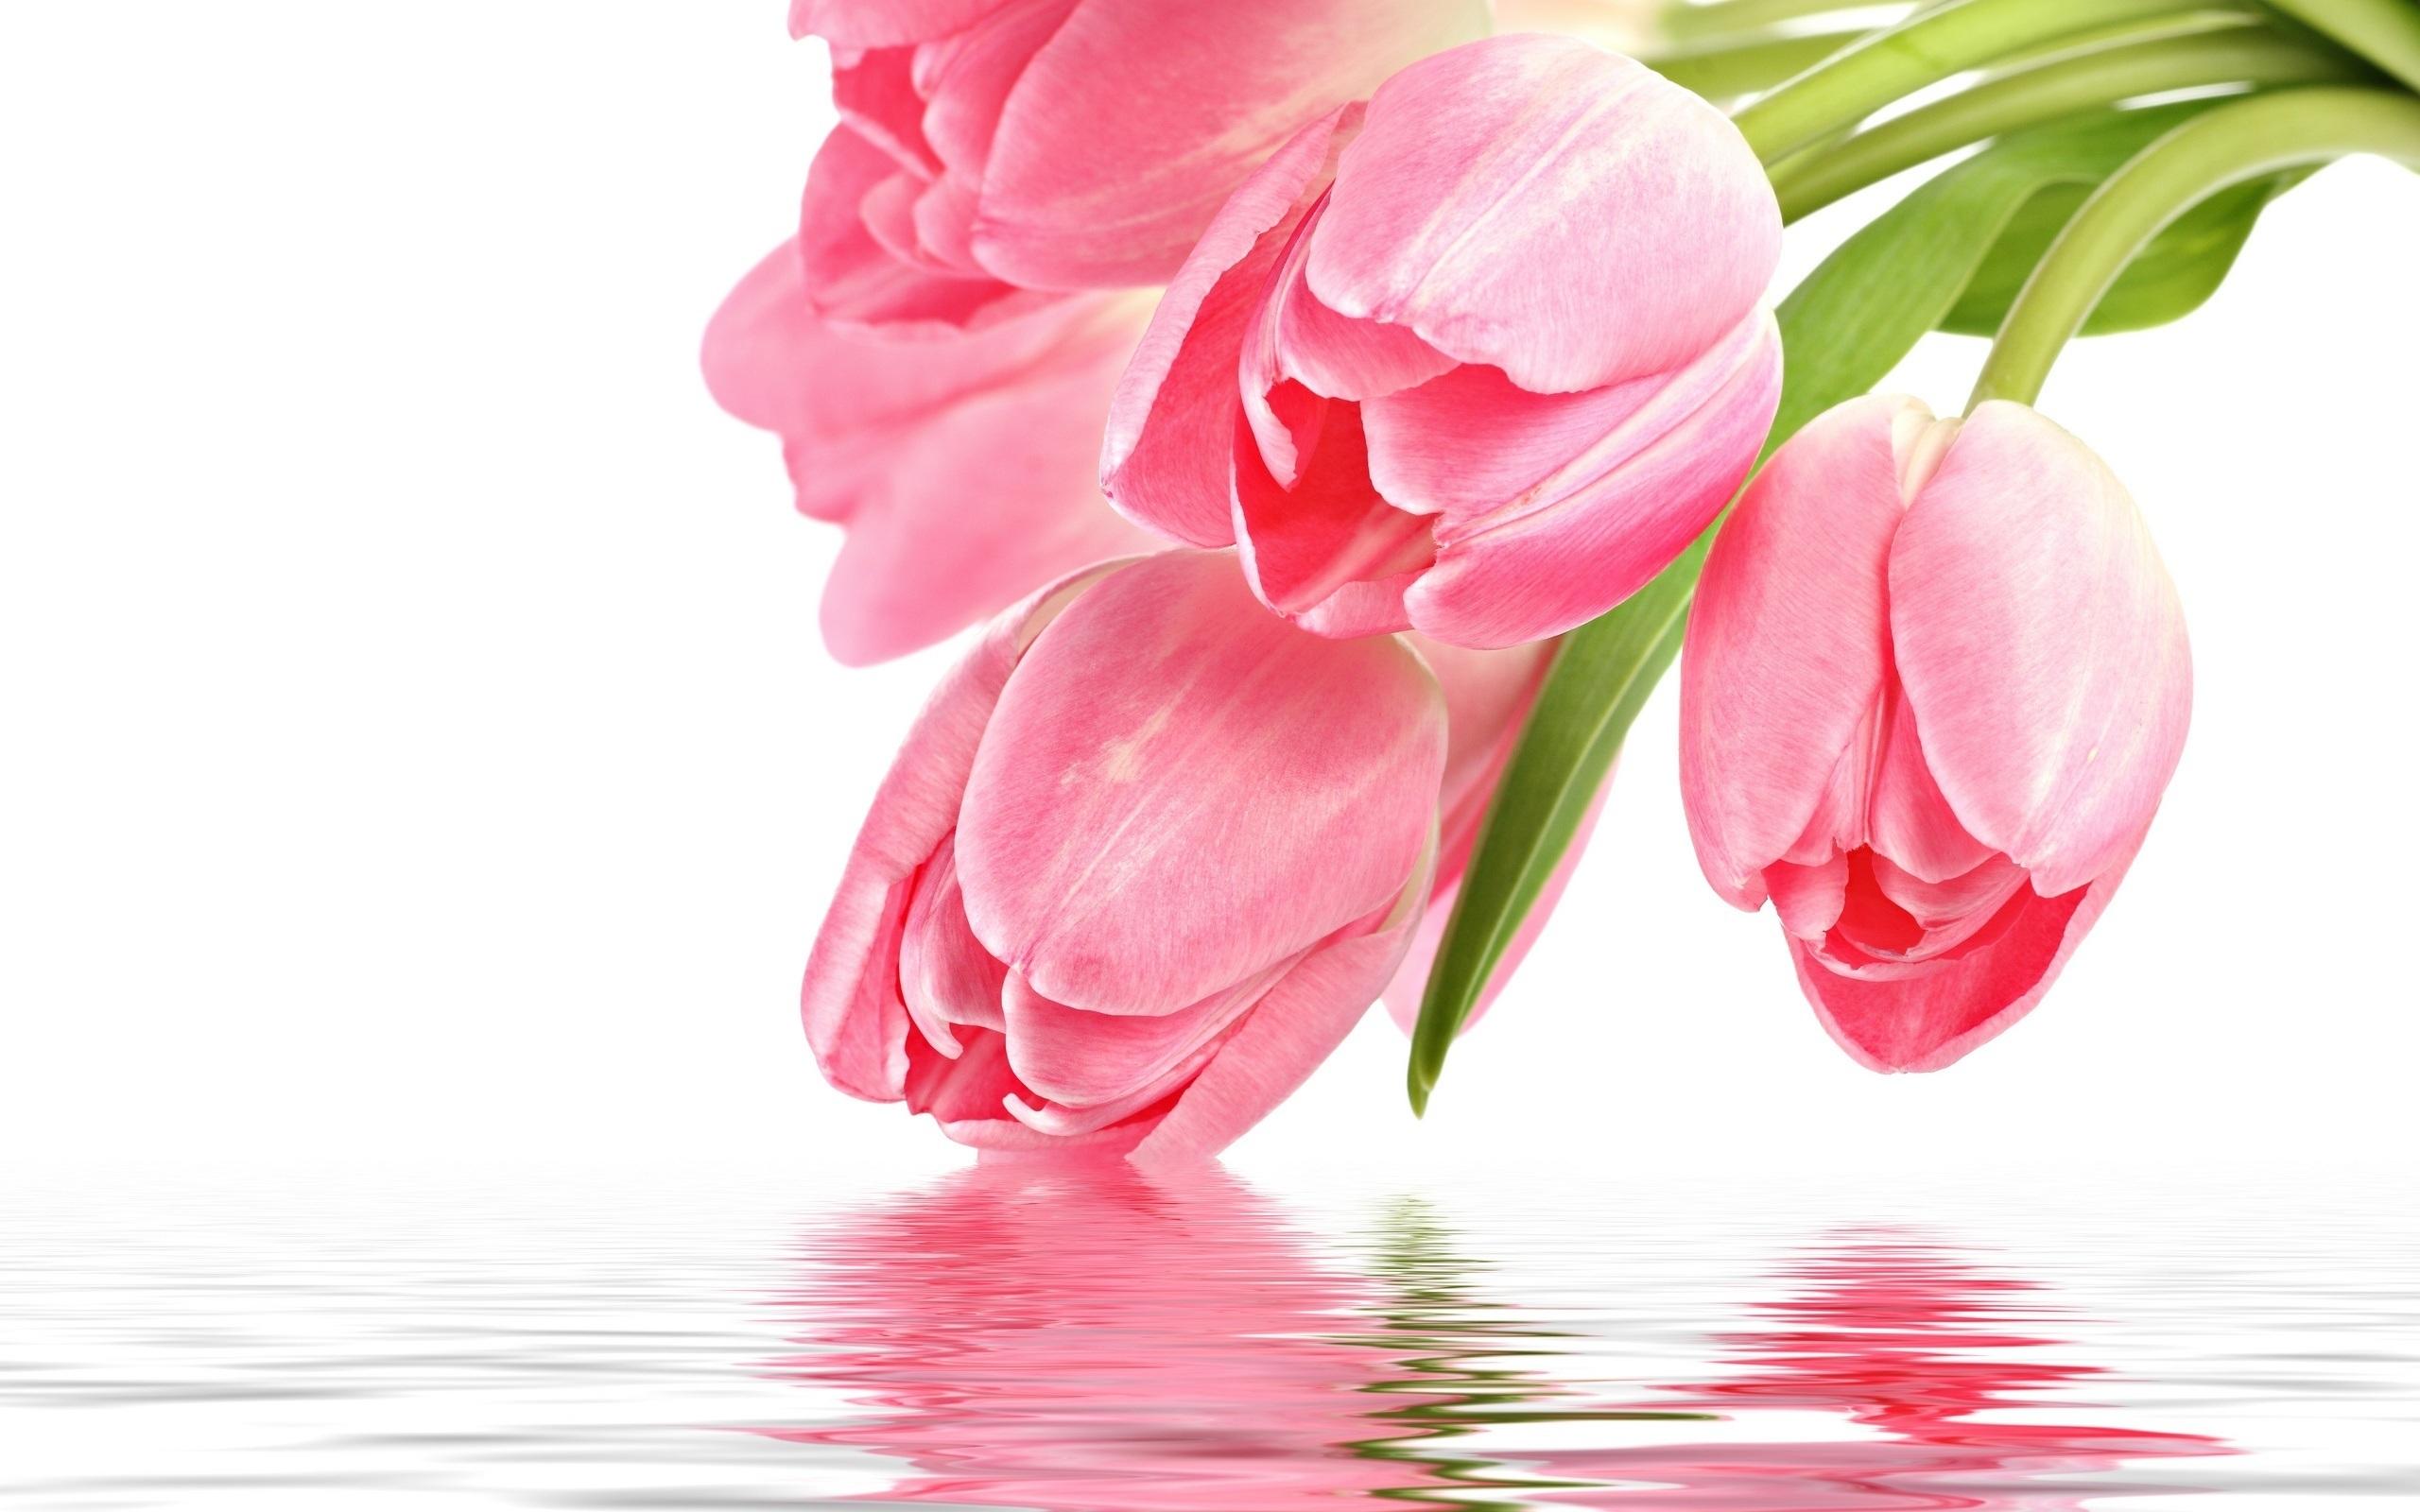 Wallpaper Tulip flower with water reflection 2560x1600 HD